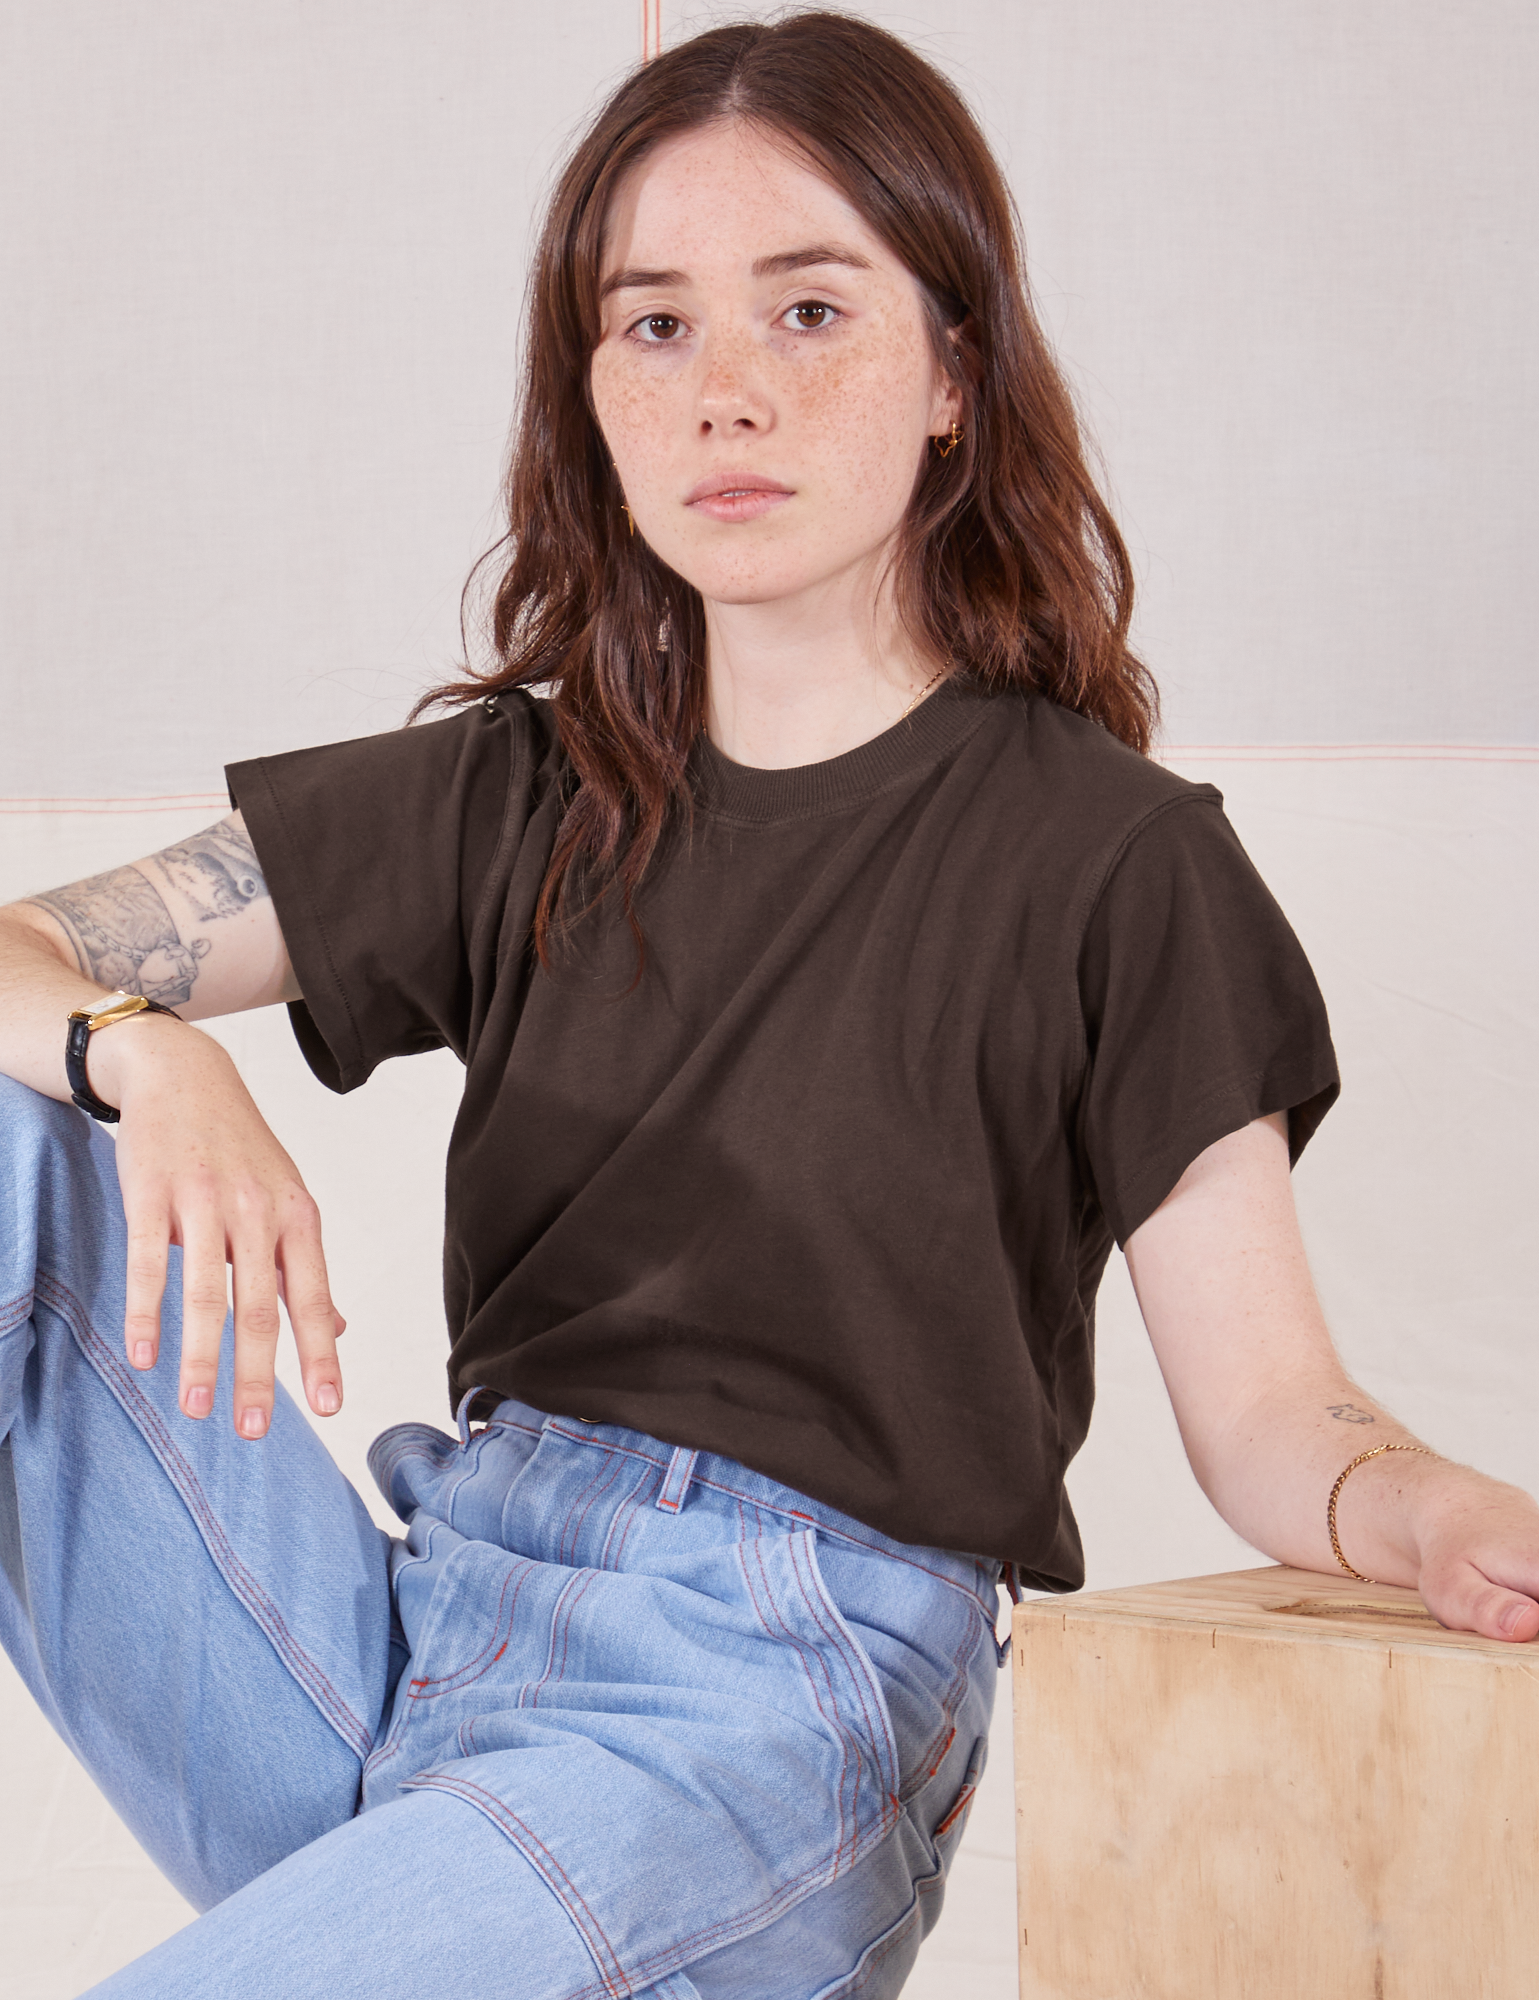 Hana is wearing Organic Vintage Tee in Espresso Brown and light wash Carpenter Jeans